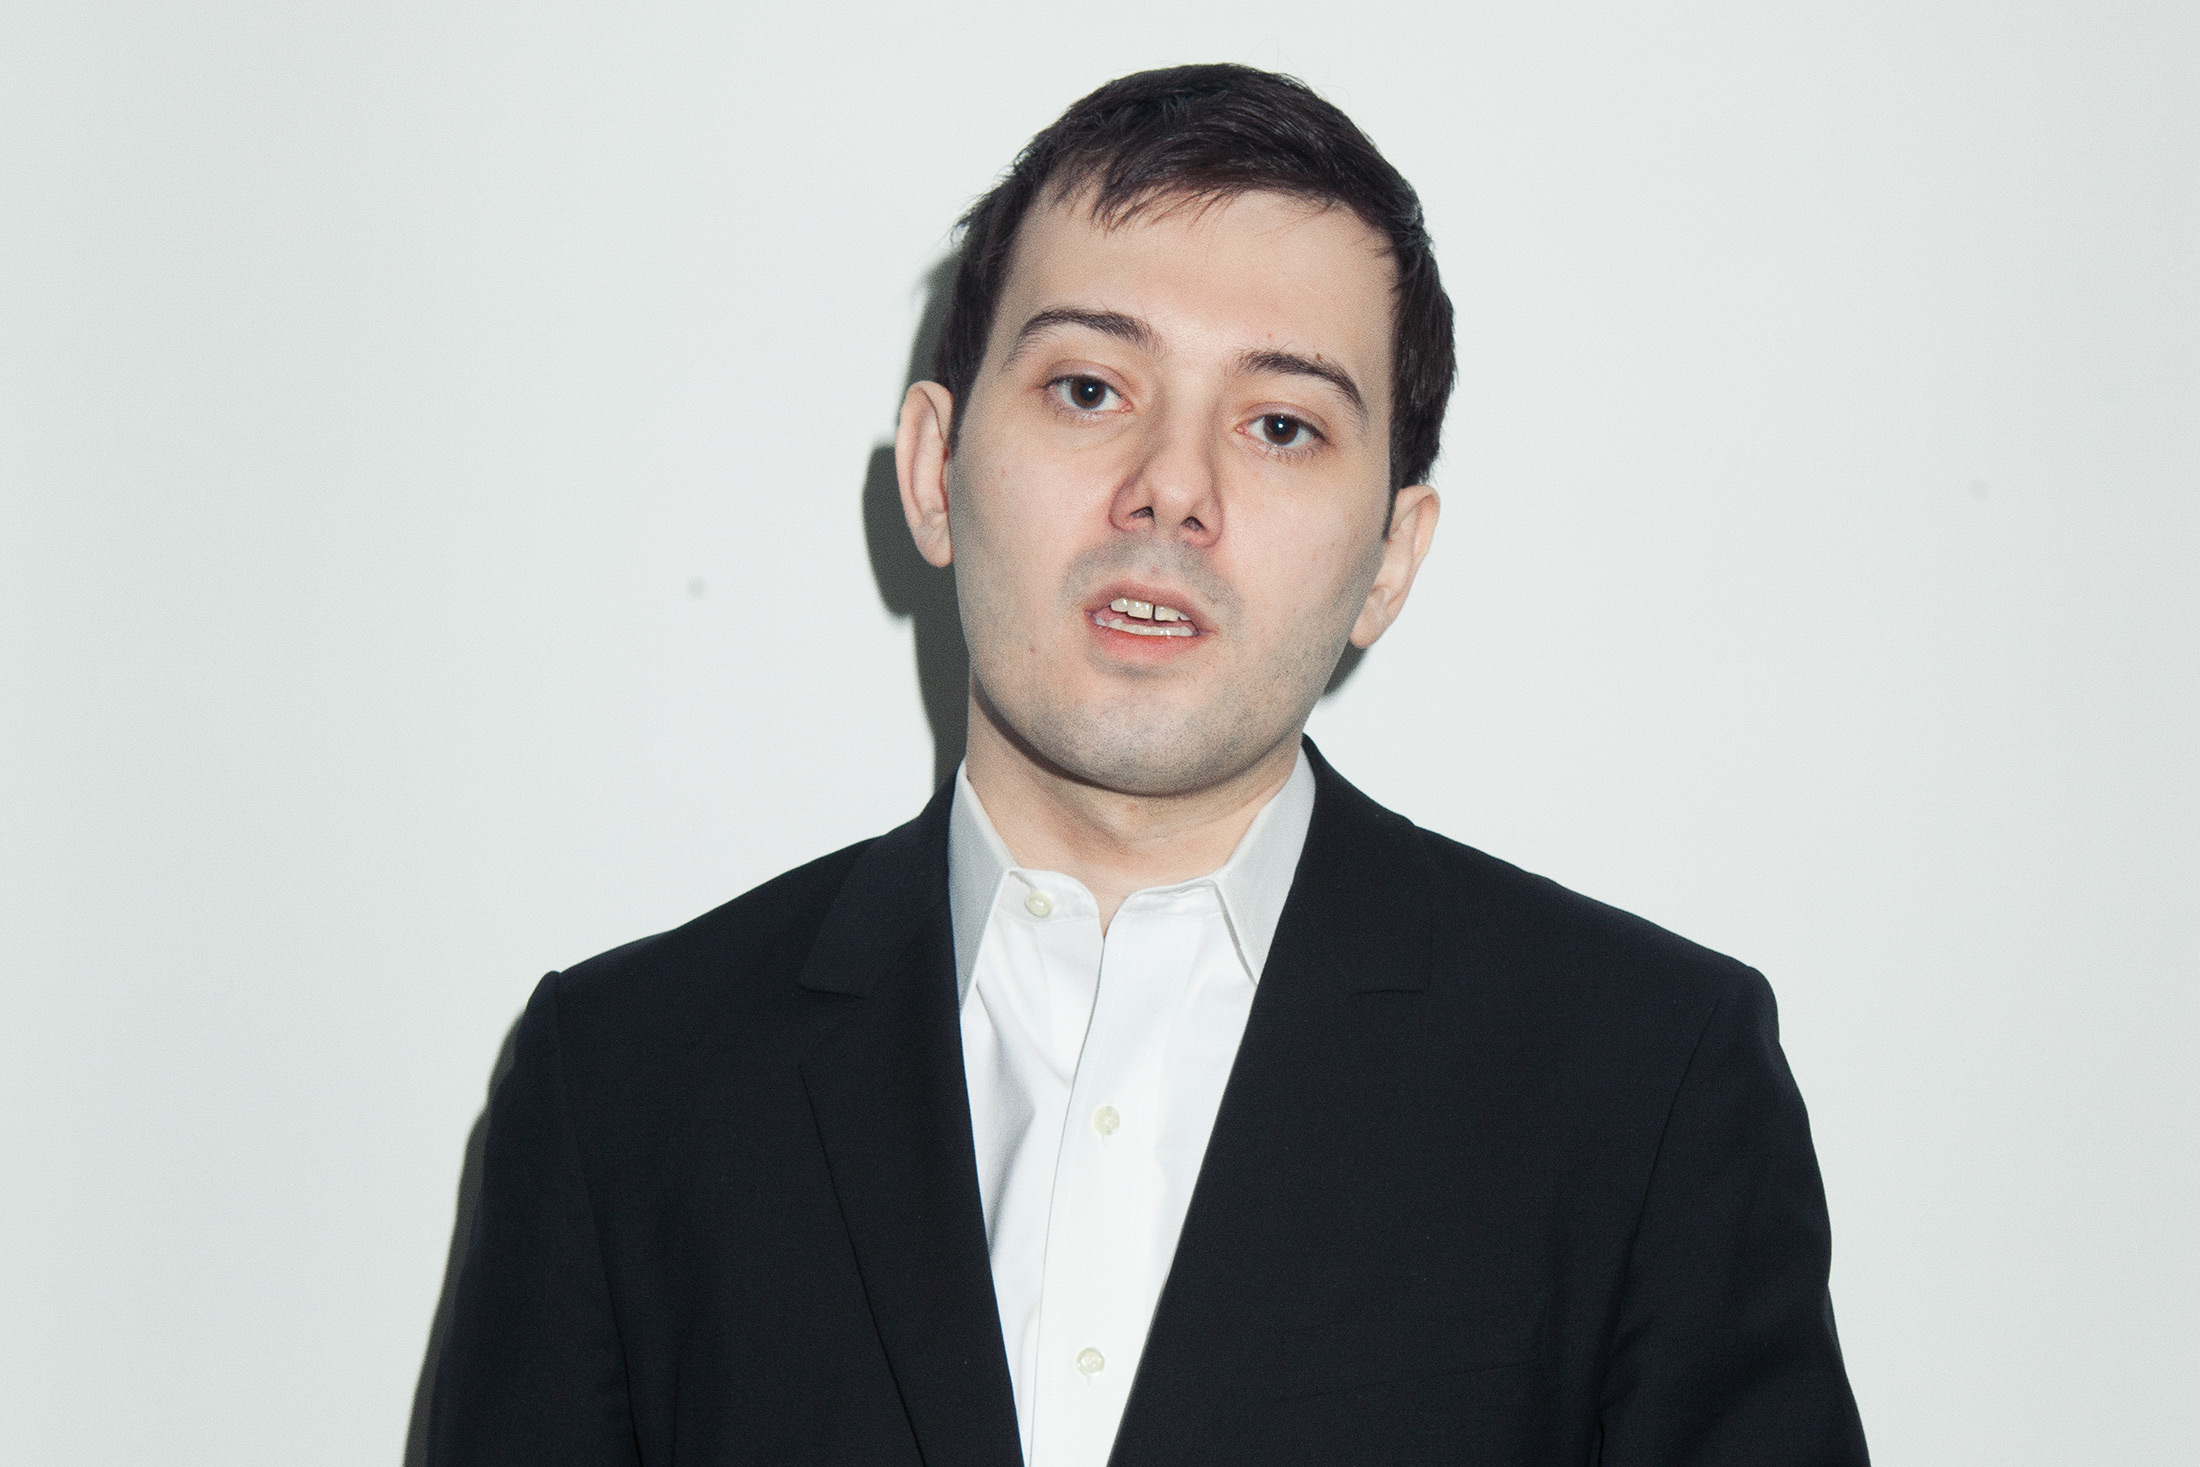 Breaking: Shkreli, Drug Price Gouging CEO, Arrested on Securities Fraud Charges